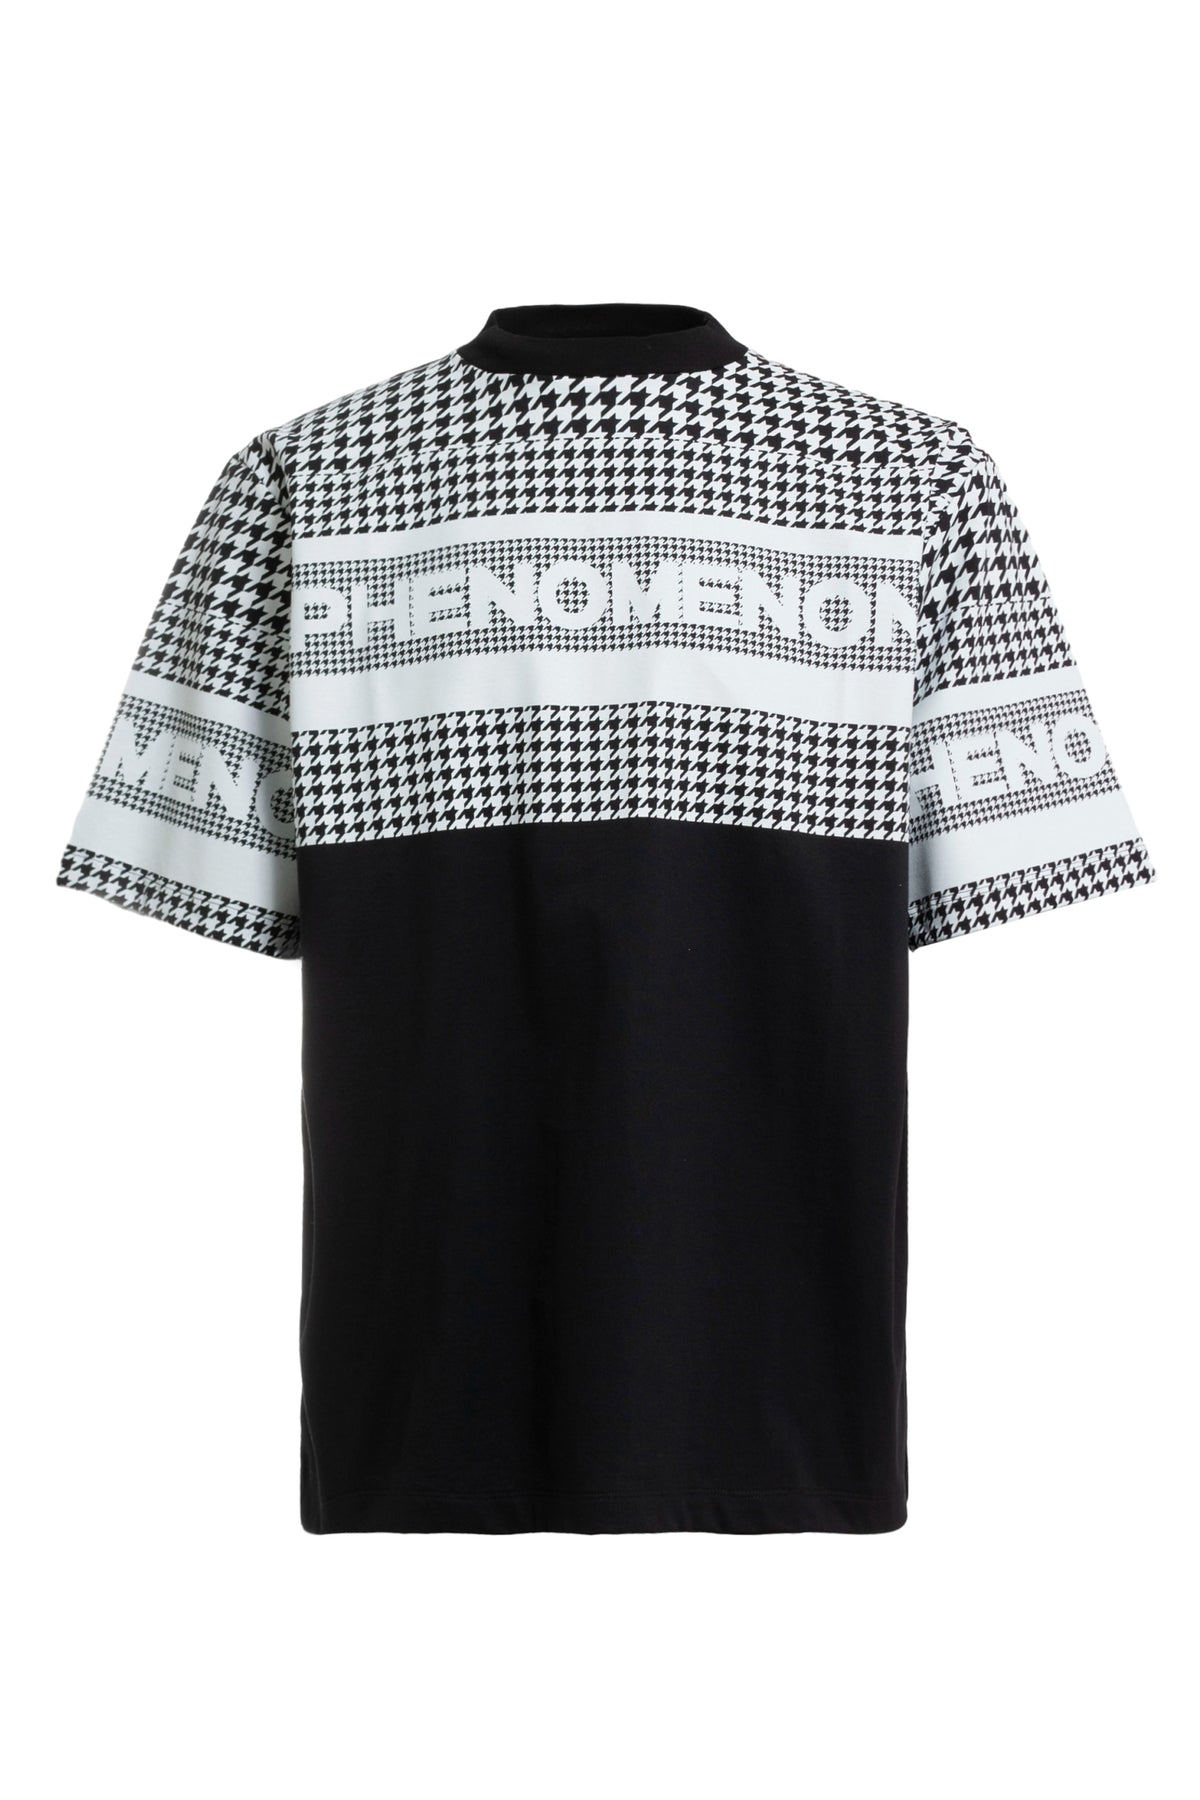 HOUNDSTOOTH SS TEE / BLK